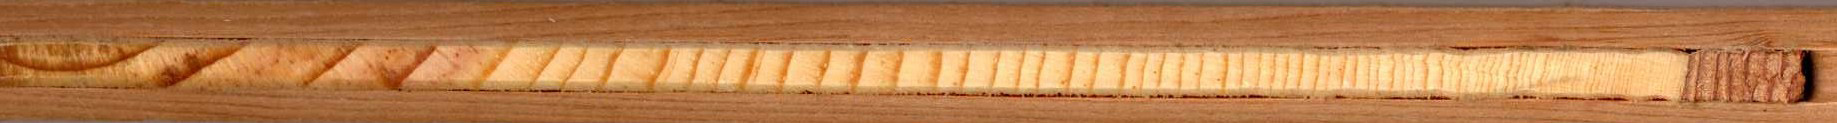 A high resolution scan of a live-tree core.